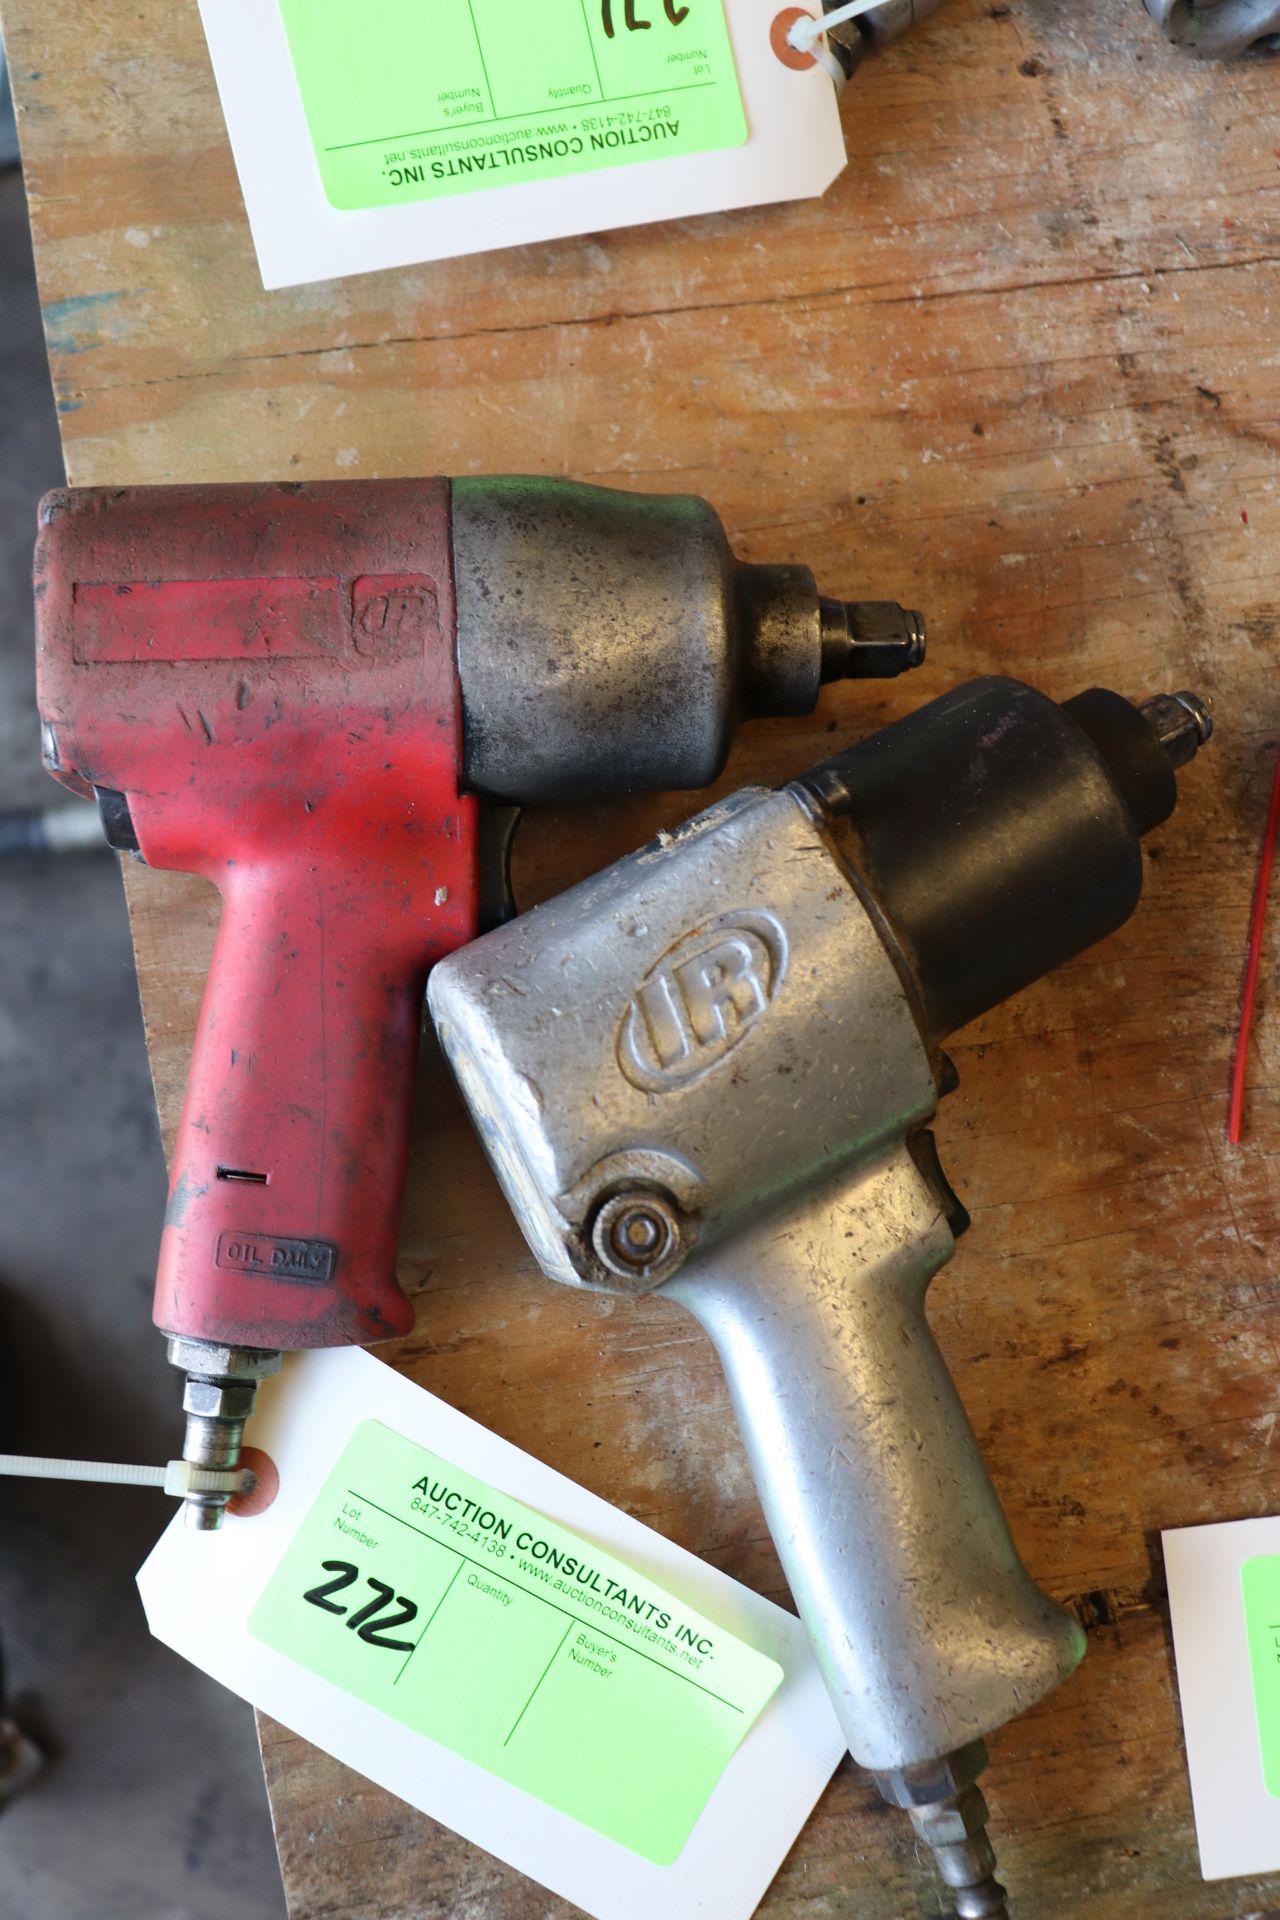 Two Ingersoll Rand impact drivers